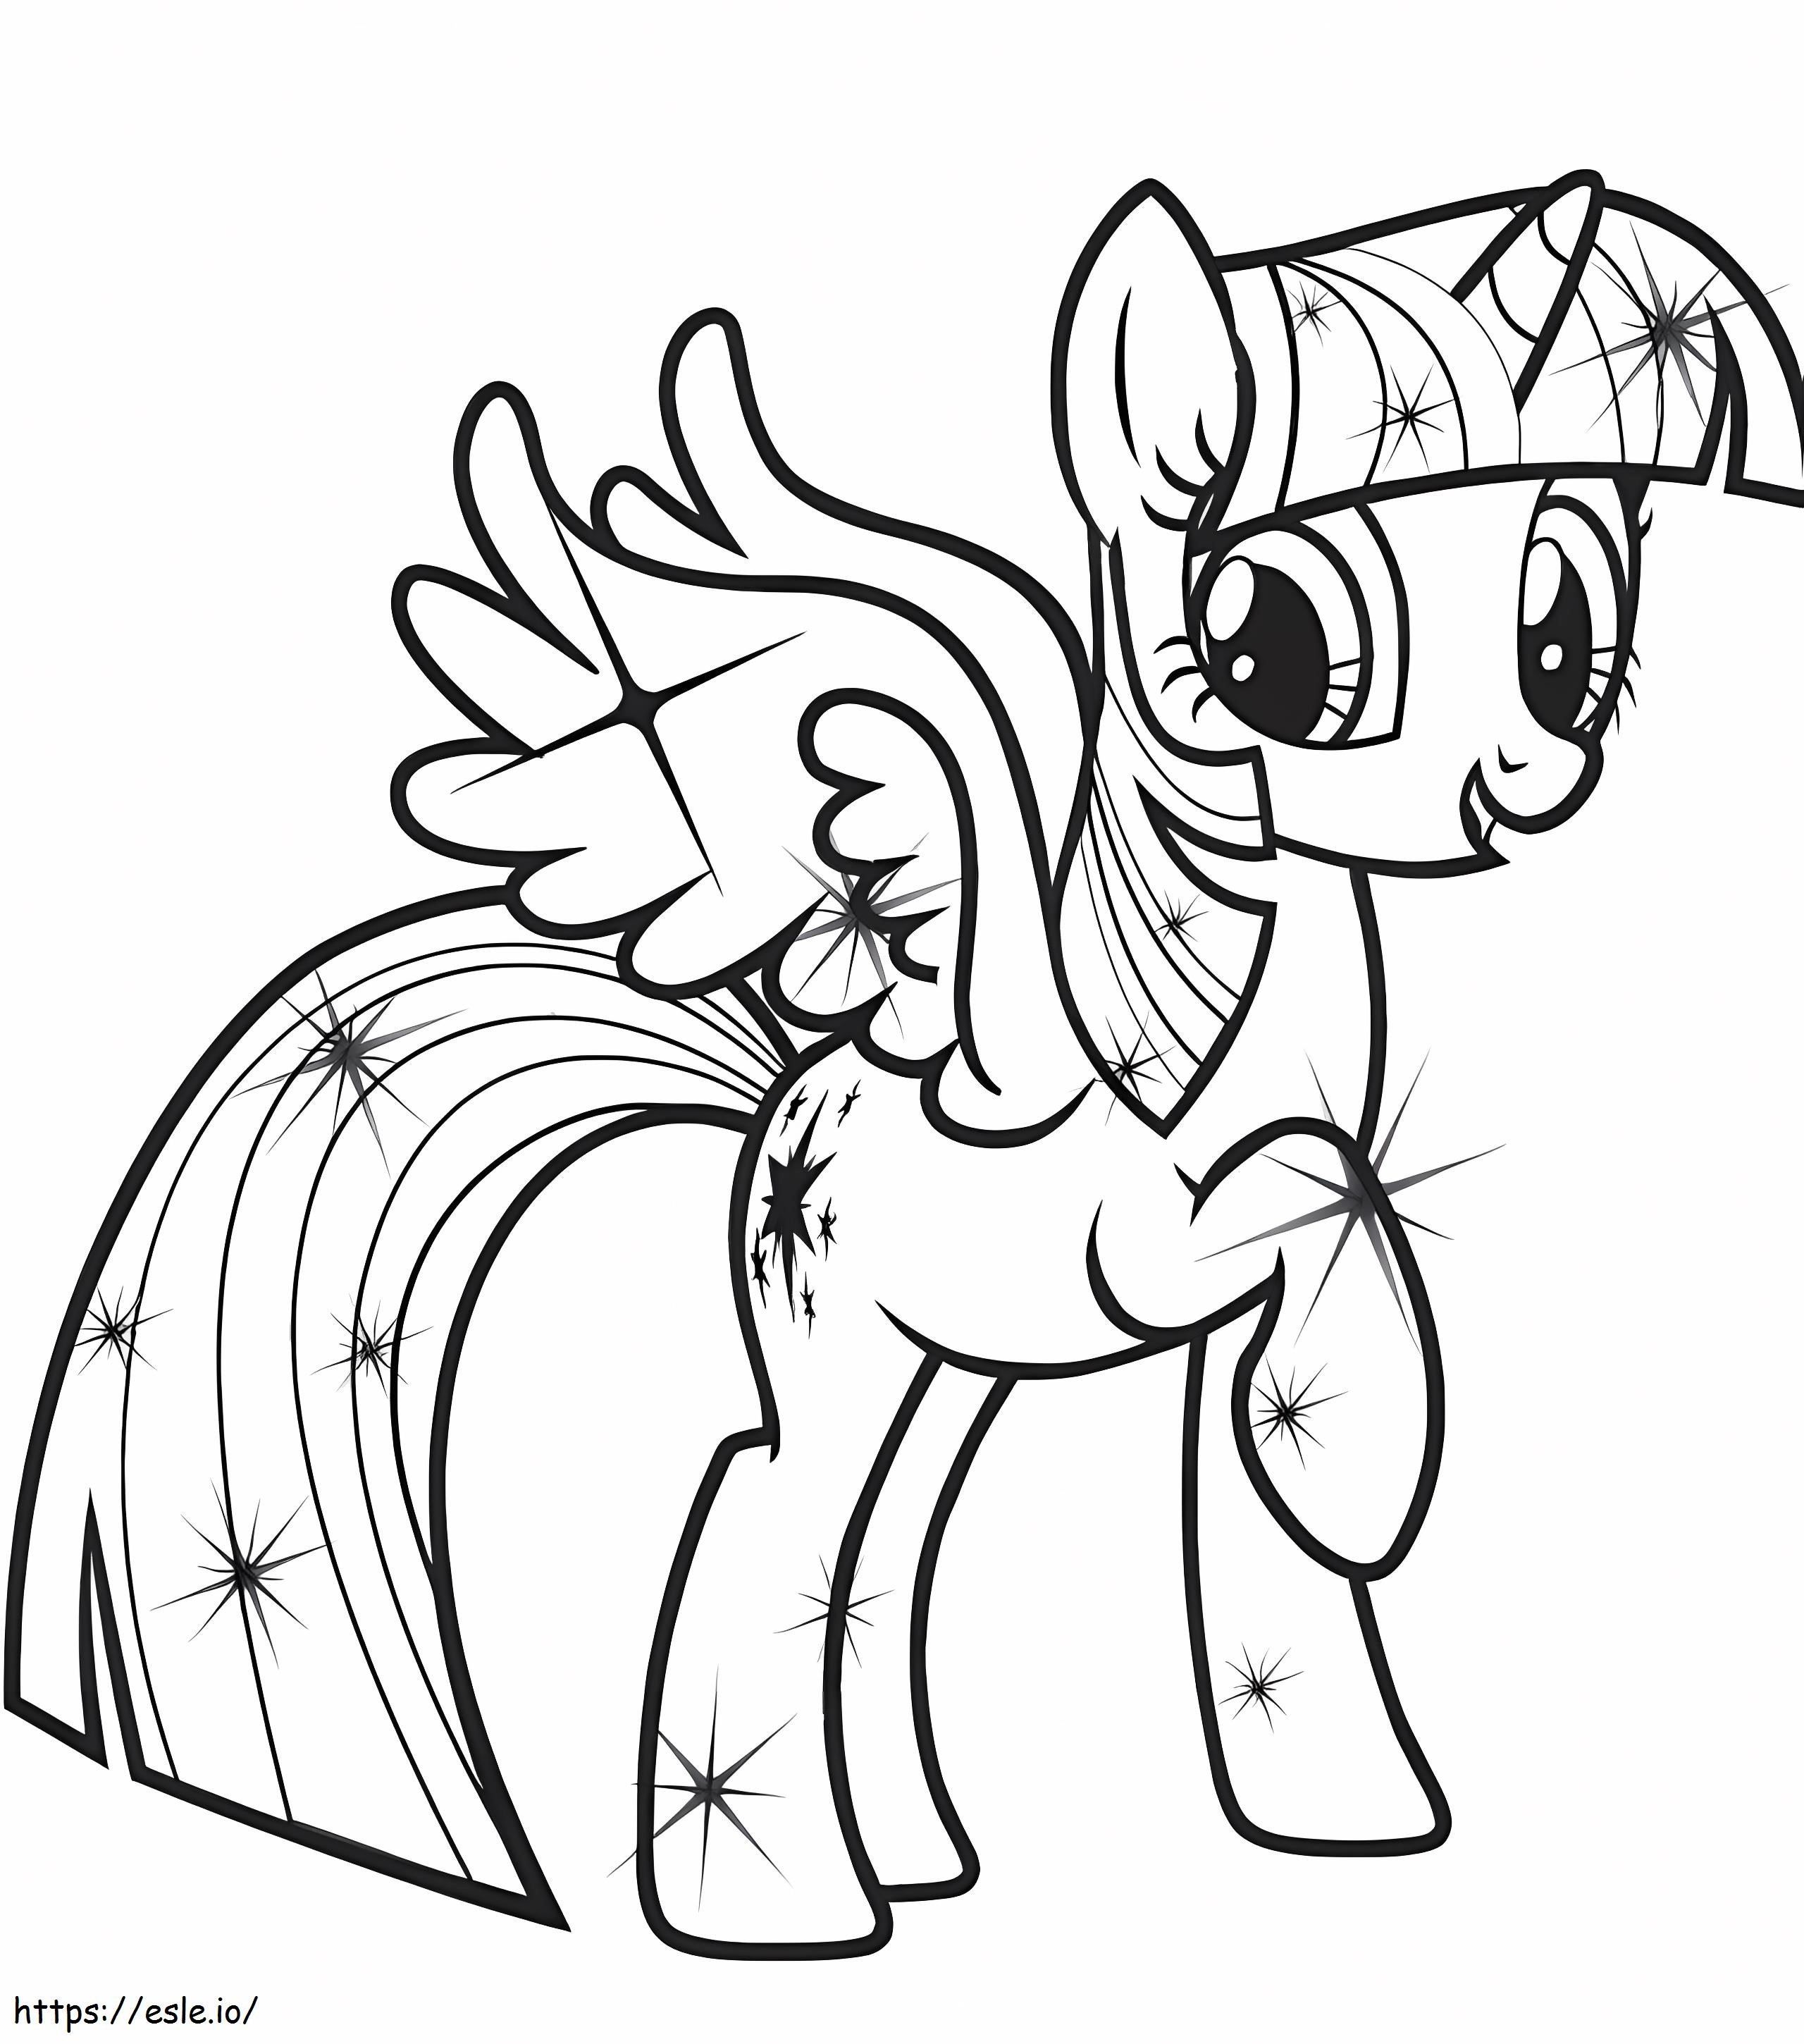 Happy Twilight Sparkle coloring page